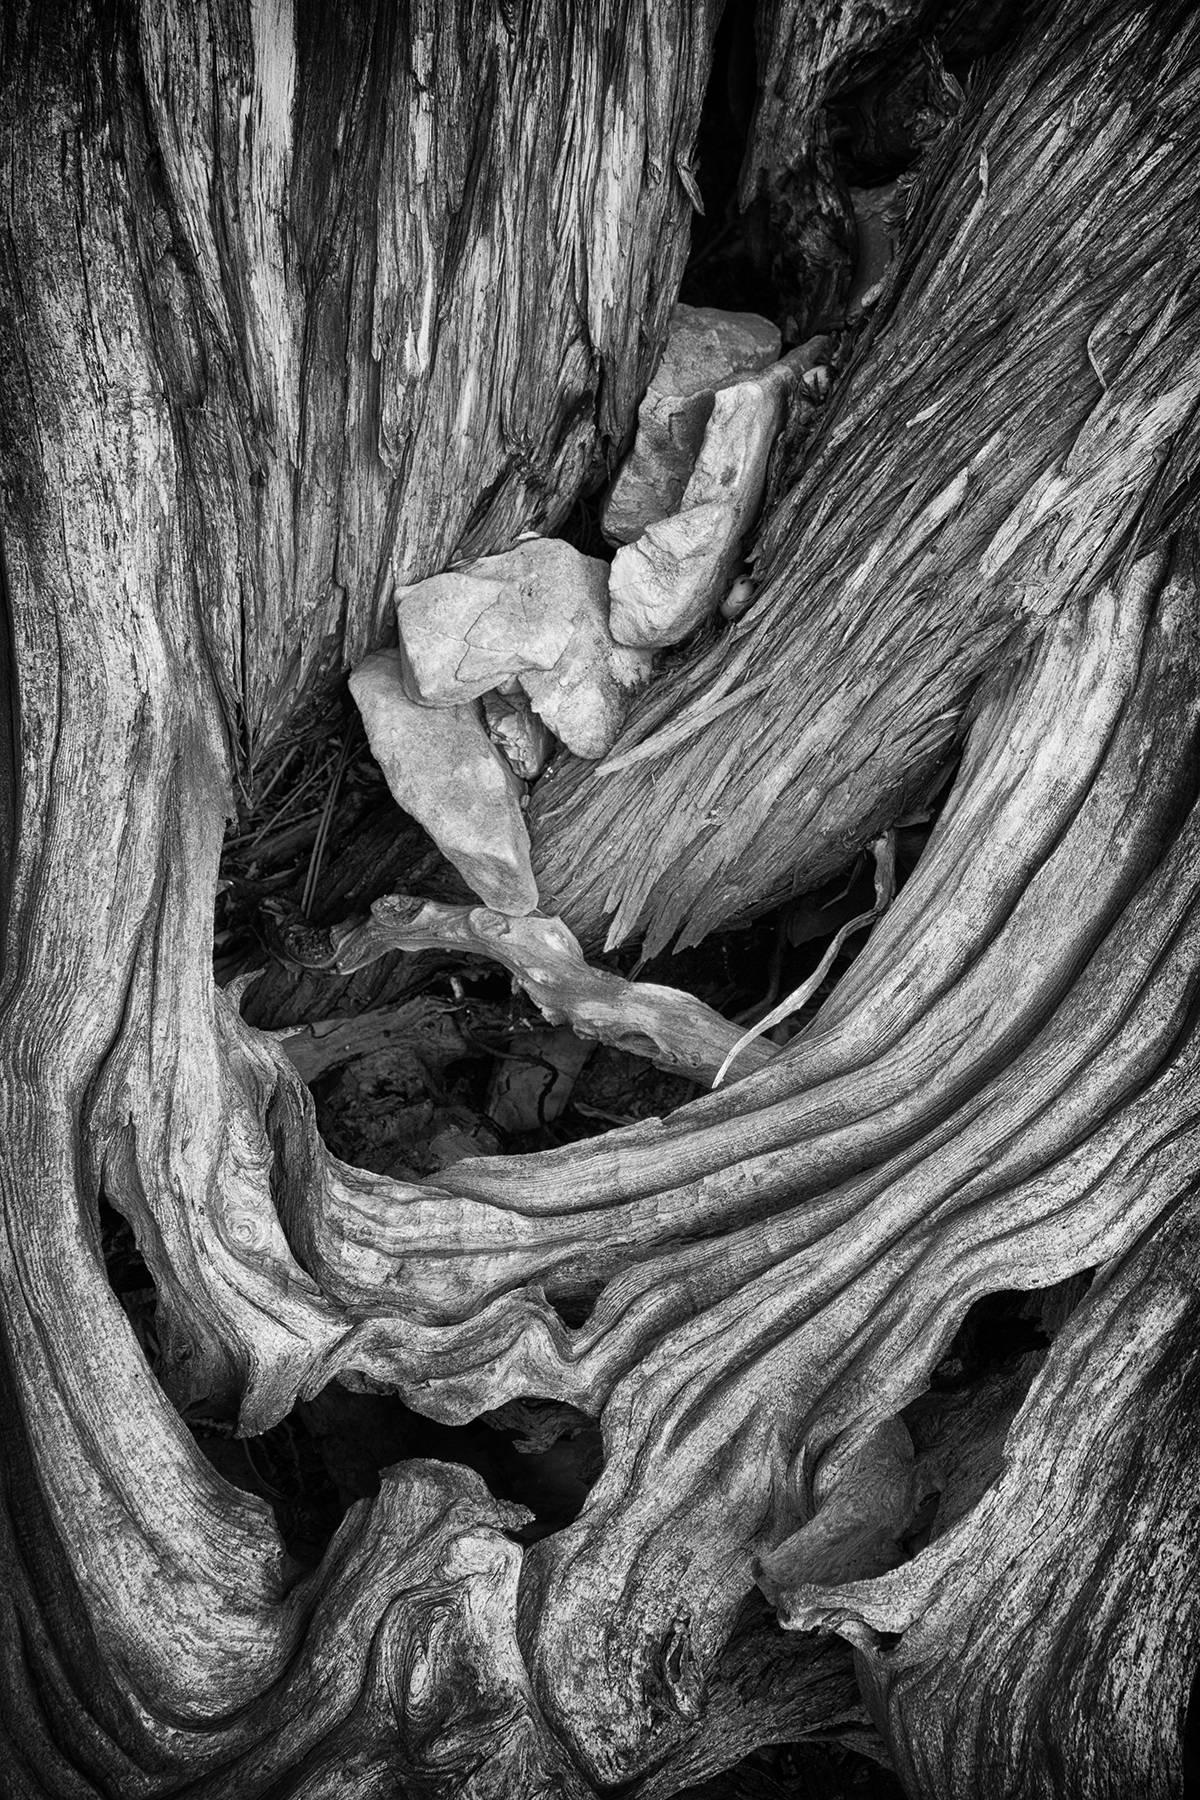 Rebecca Skinner Black and White Photograph - "Erosion #1", abstract, black, white, tree, roots, bark, landscape, photograph